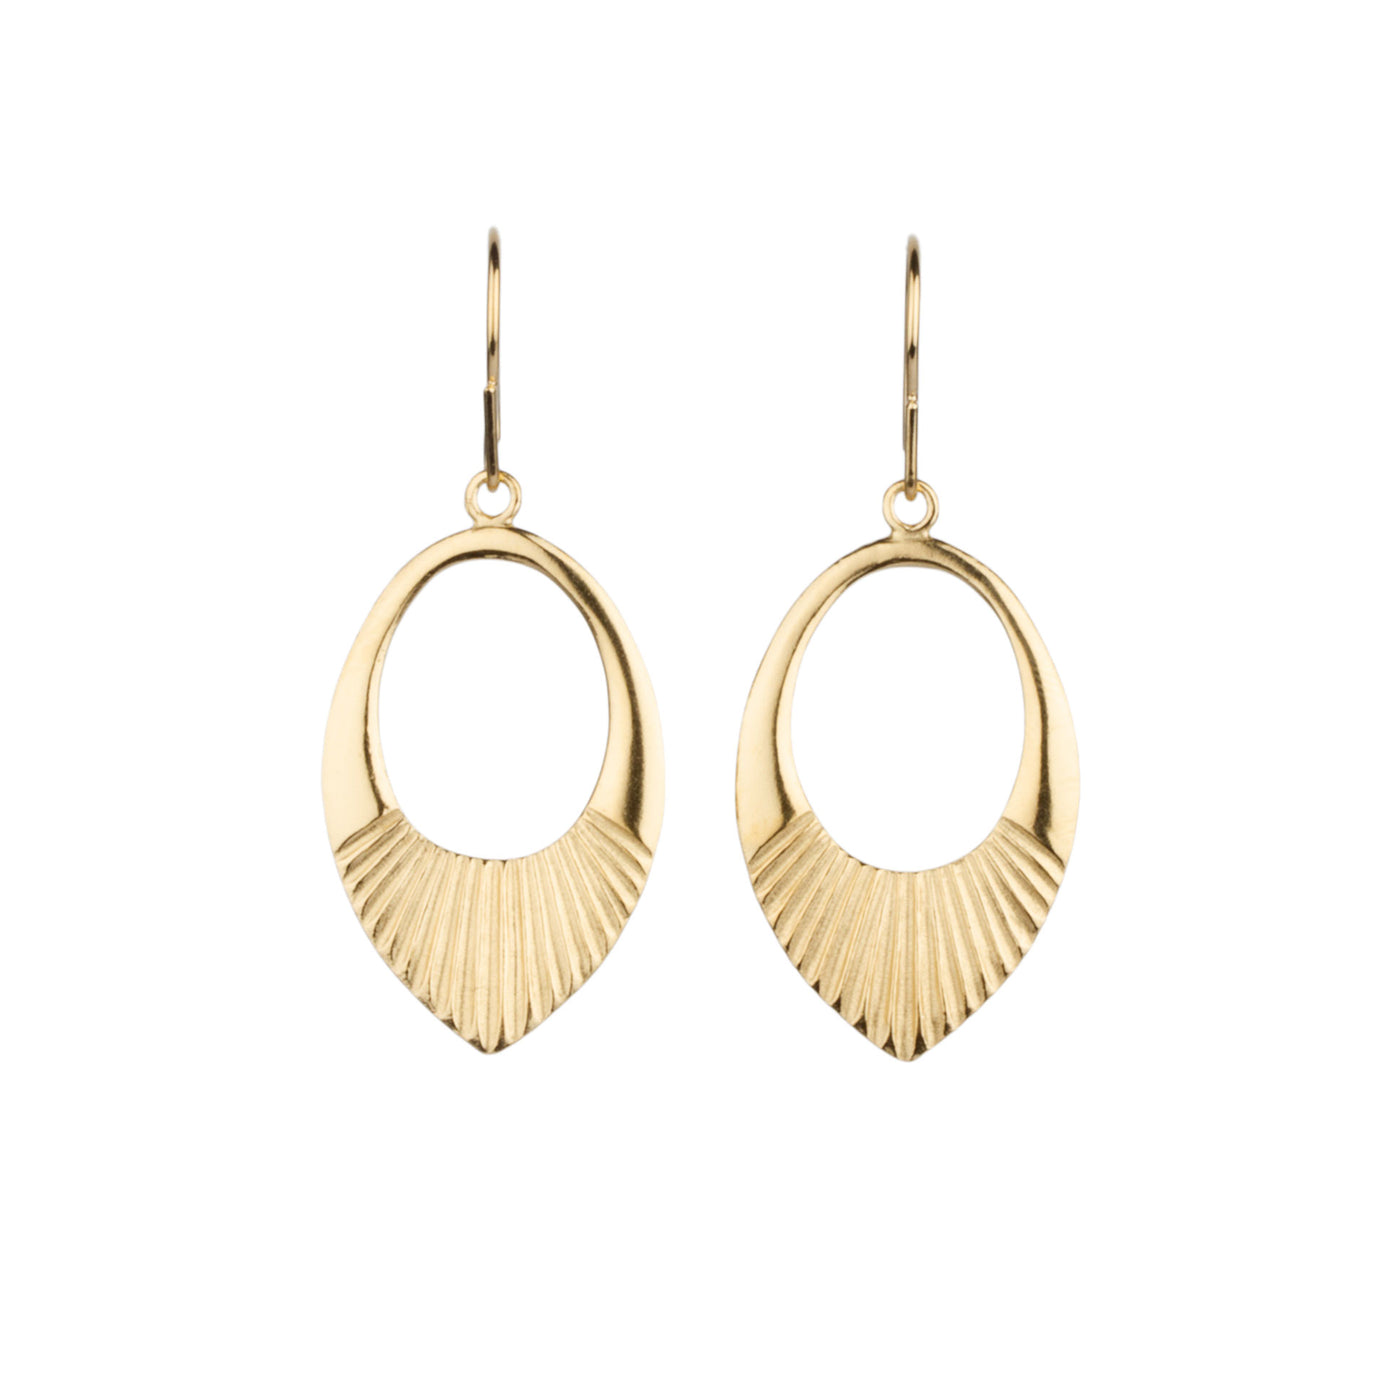 Gold vermeil medium open petal shape earrings with textured bottoms on a white background